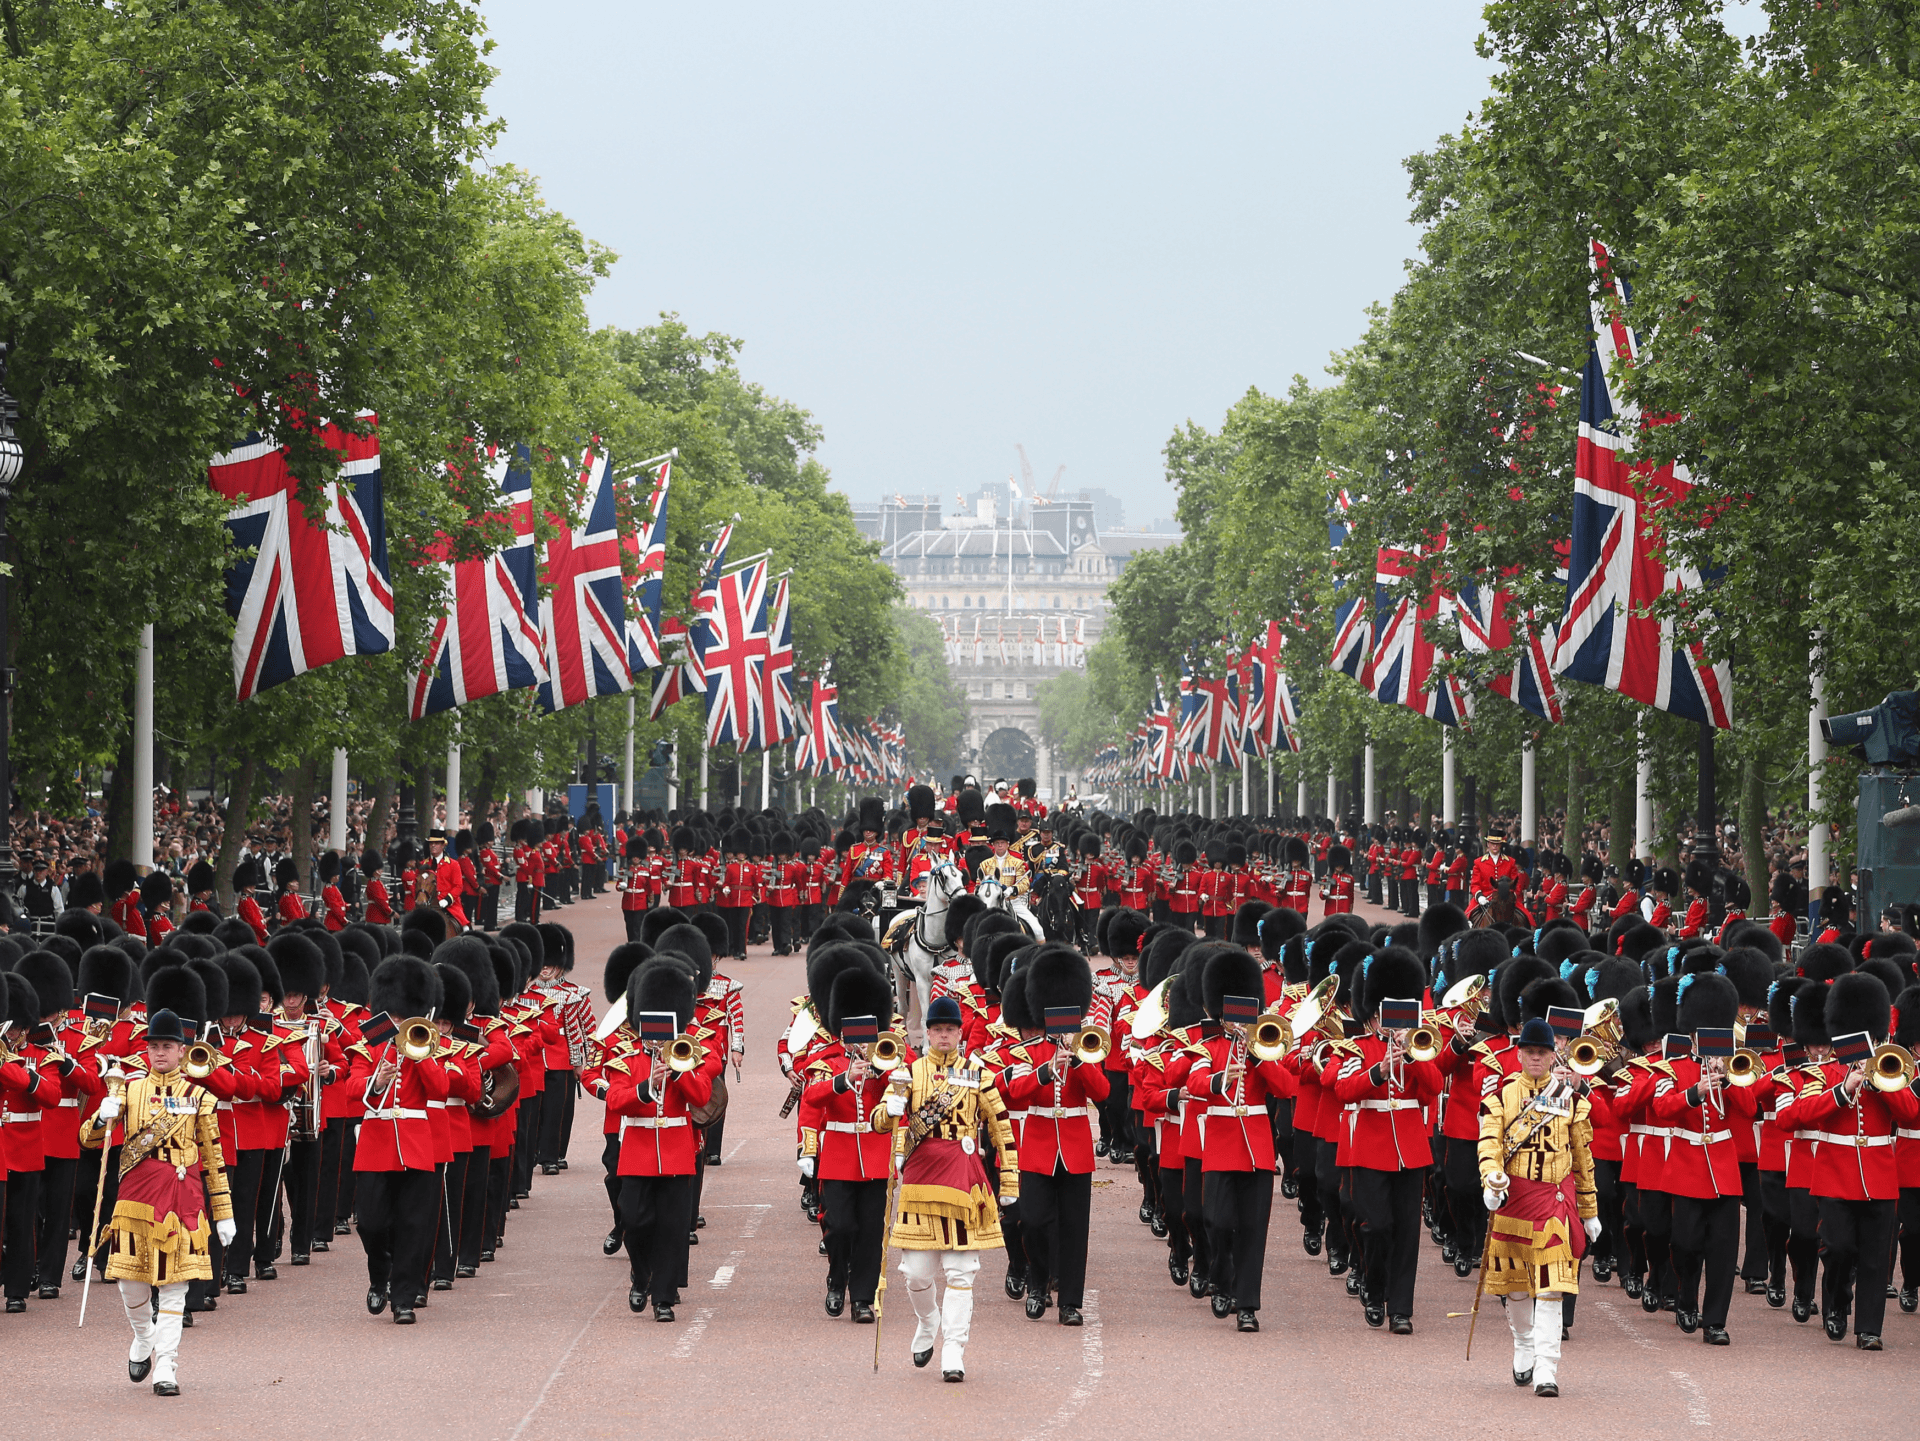 LONDON, ENGLAND - JUNE 14: Queen Elizabeth II and Prince Philip, Duke of Edinburgh process down the Mall during Trooping the Colour - Queen Elizabeth II's Birthday Parade, at The Royal Horseguards on June 14, 2014 in London, England. (Photo by Chris Jackson/Getty Images)